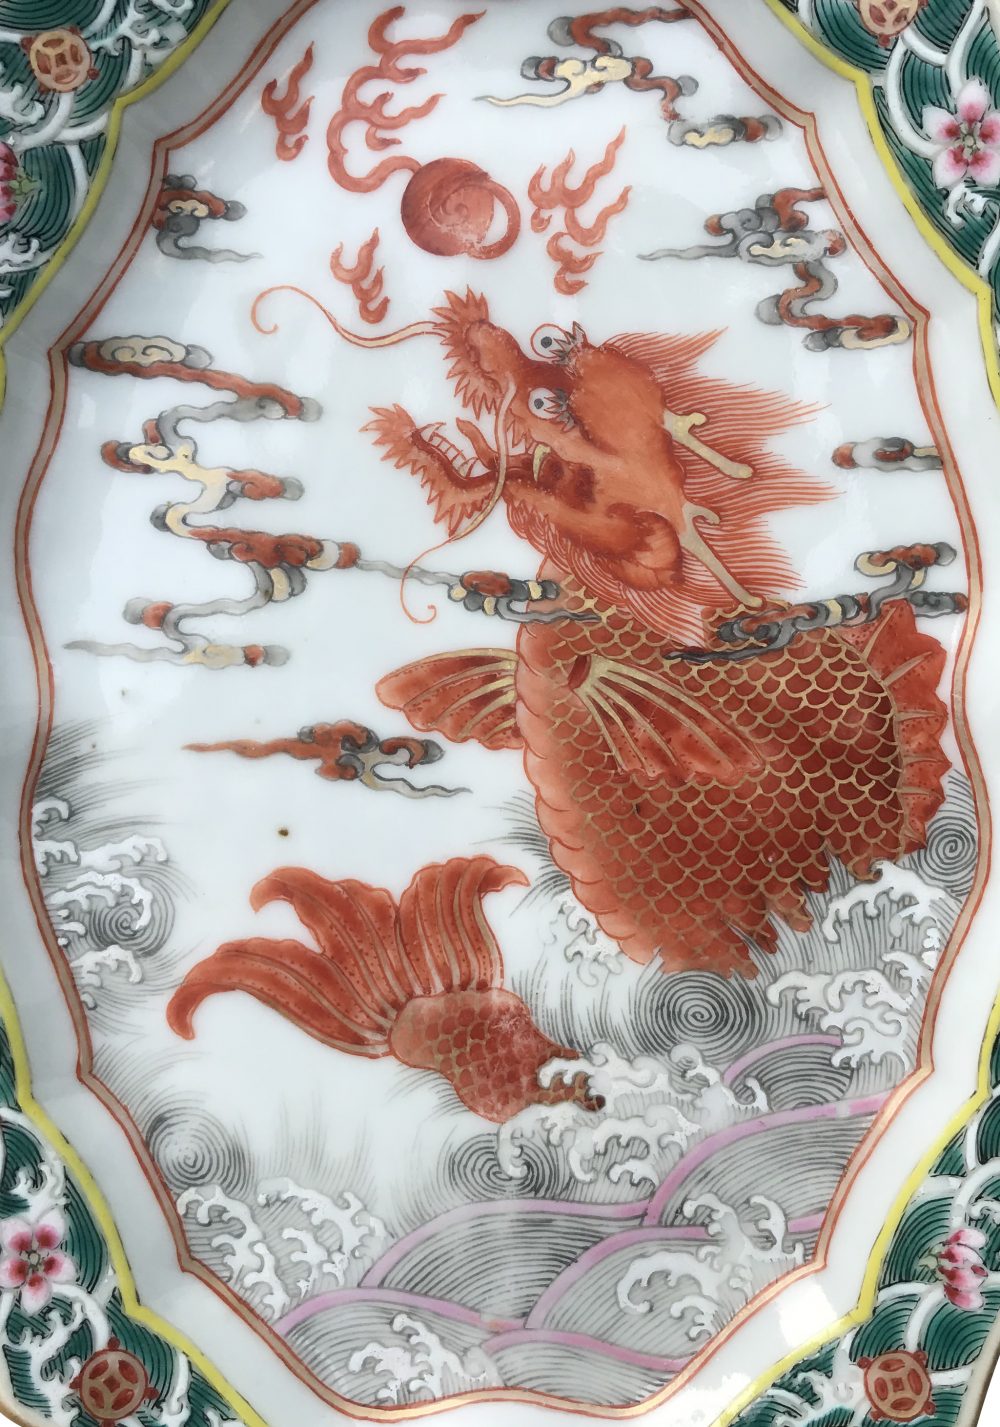 Famille rose Porcelaine Late Qianlong (1736-1795), circa 1780, Chine